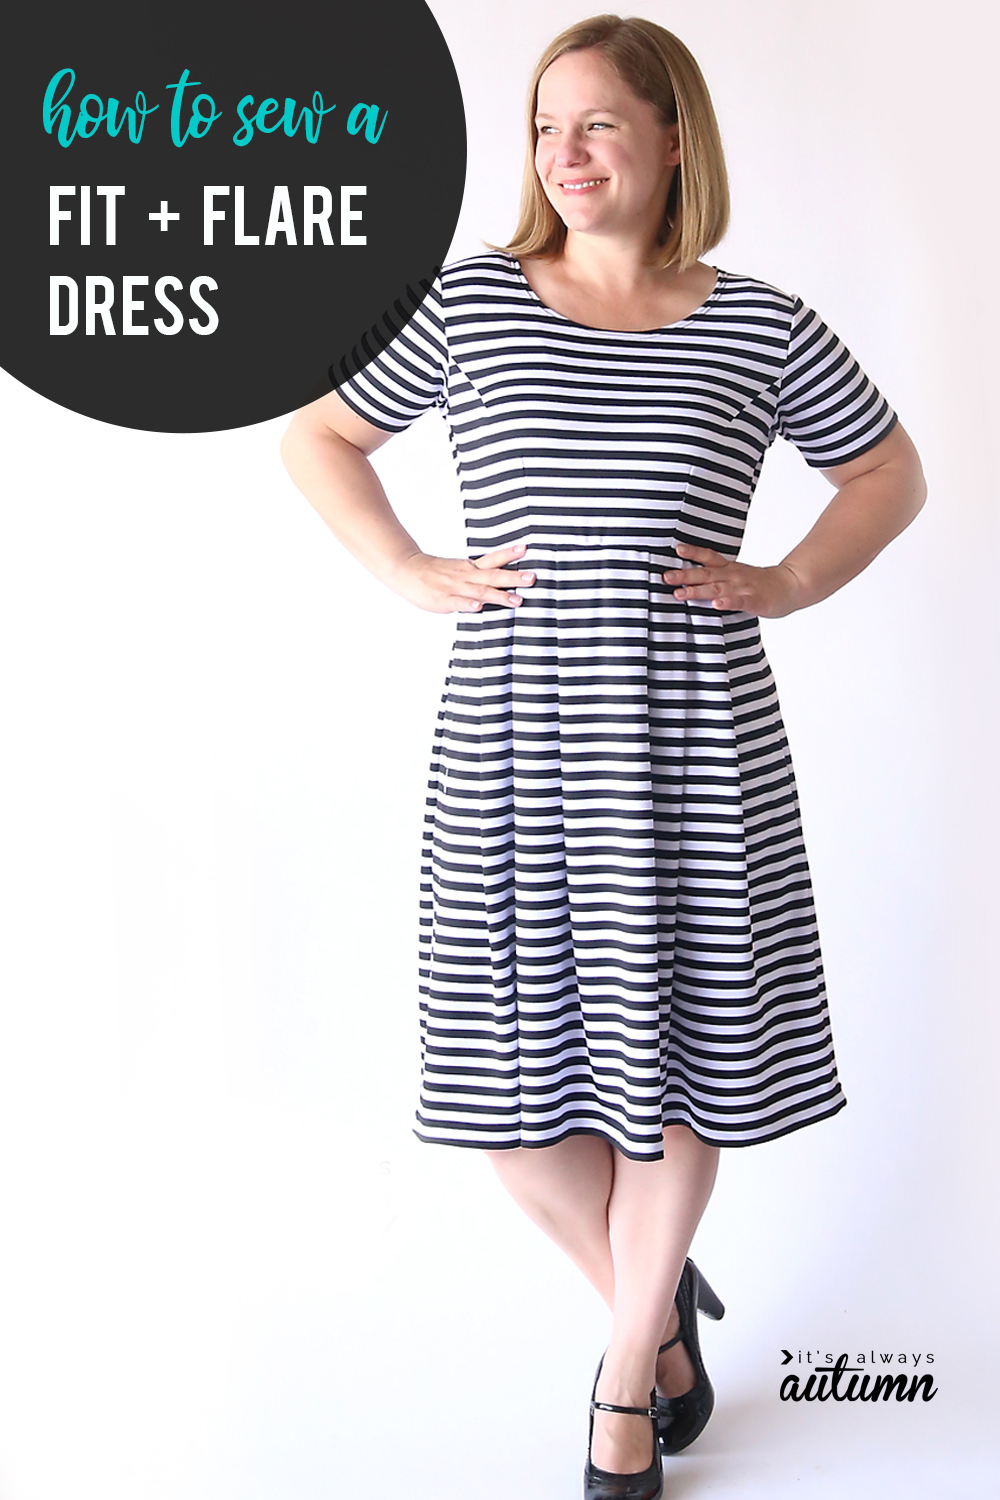 How to sew the perfect flattering fit + flare dress! Learn how to create a pattern in your size for this cute dress. Sewing tutorial.